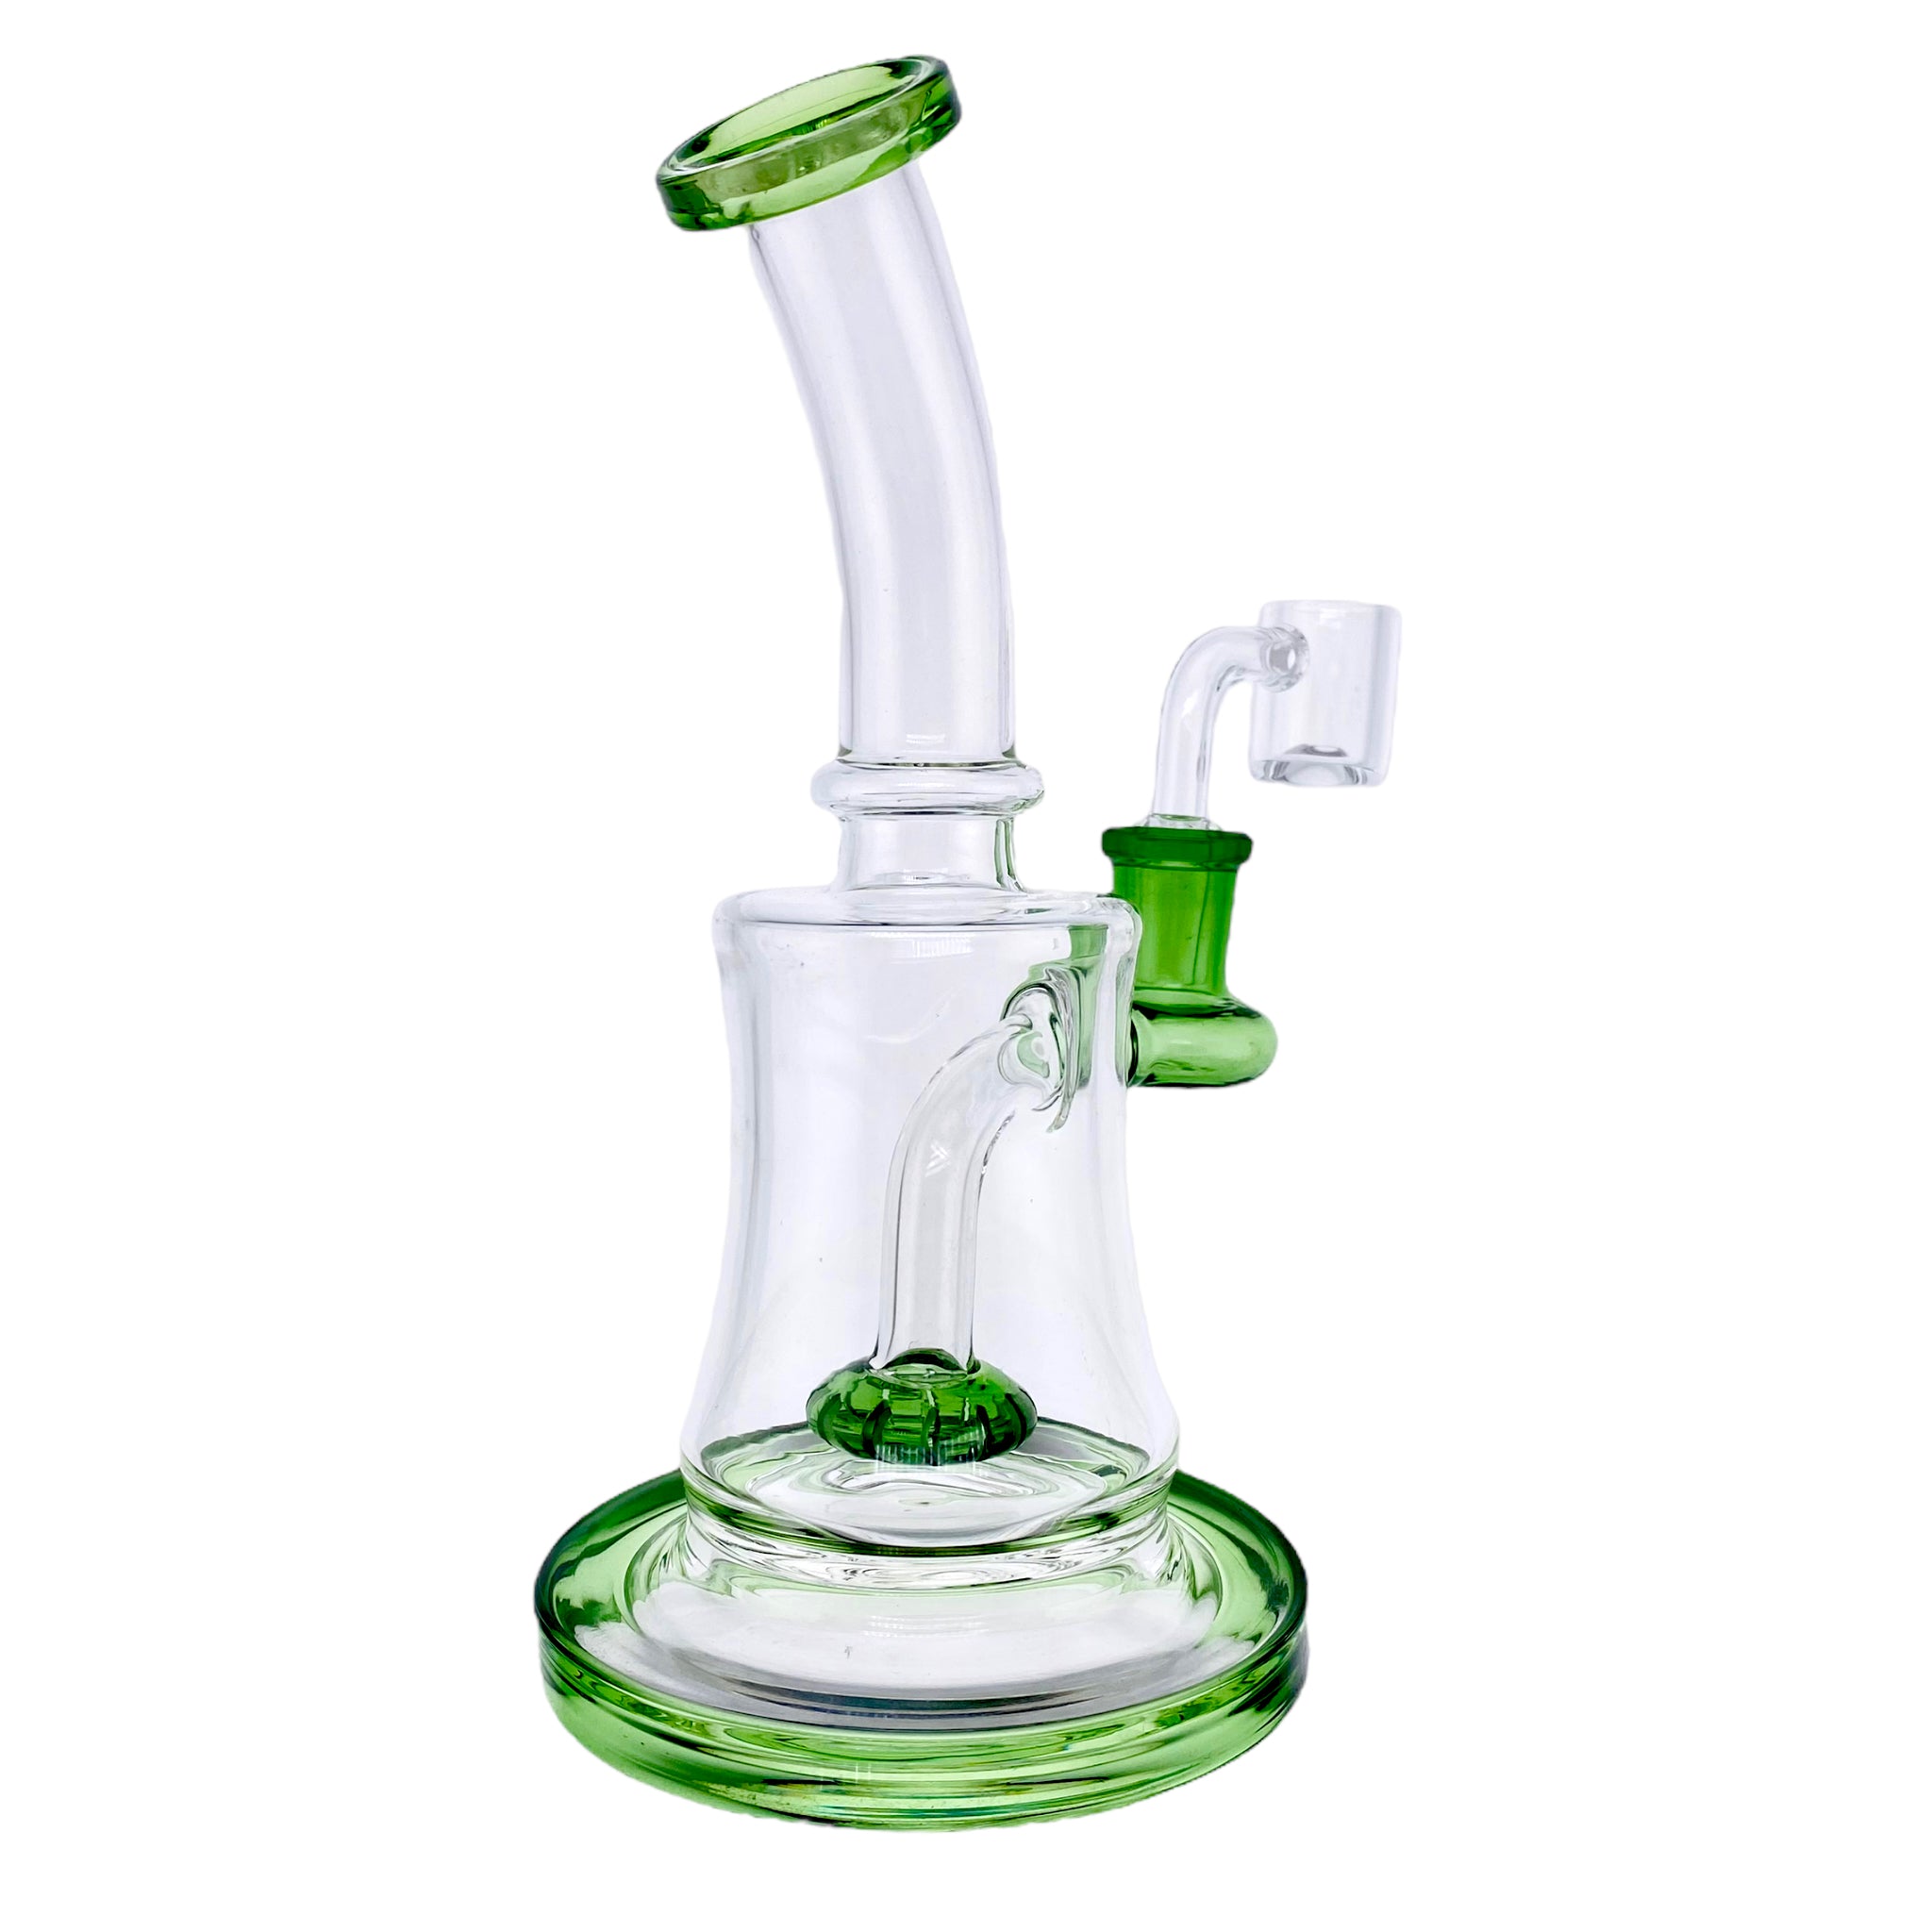 Small Clear Dab Rig With Green Showerhead Perc has 14mm female fitting